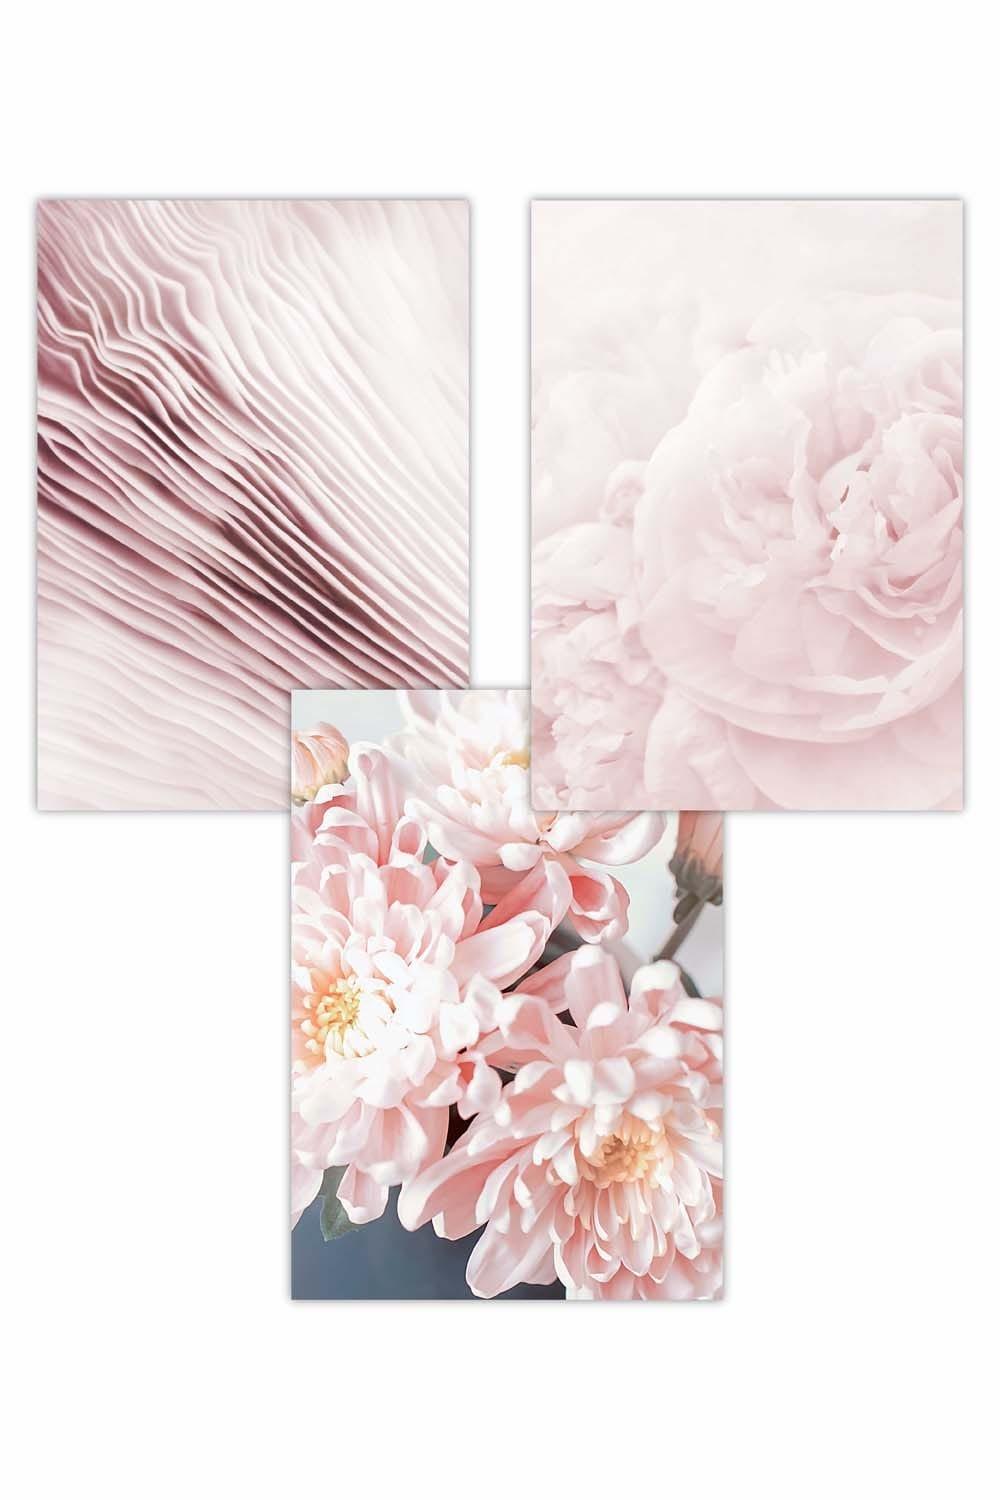 Set of 3 Abstract Pink Macro Floral Art Posters